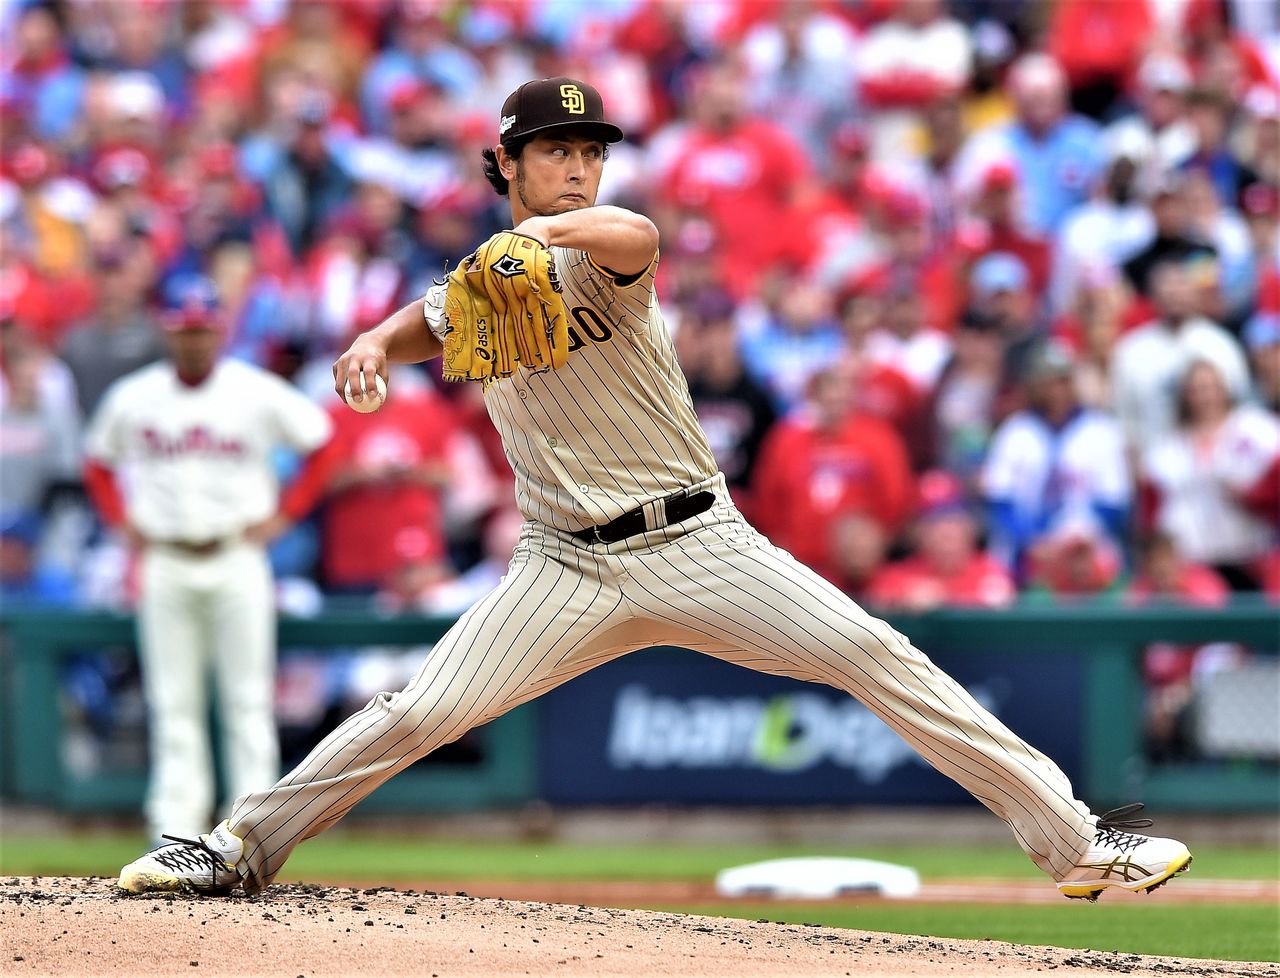 The upcoming WBC will be Darvish Yū’s second. Darvish, here pitching in Philadelphia on October 23, 2022, delivered 16 wins for the San Diego Padres in 2022. (© AFP/Jiji)